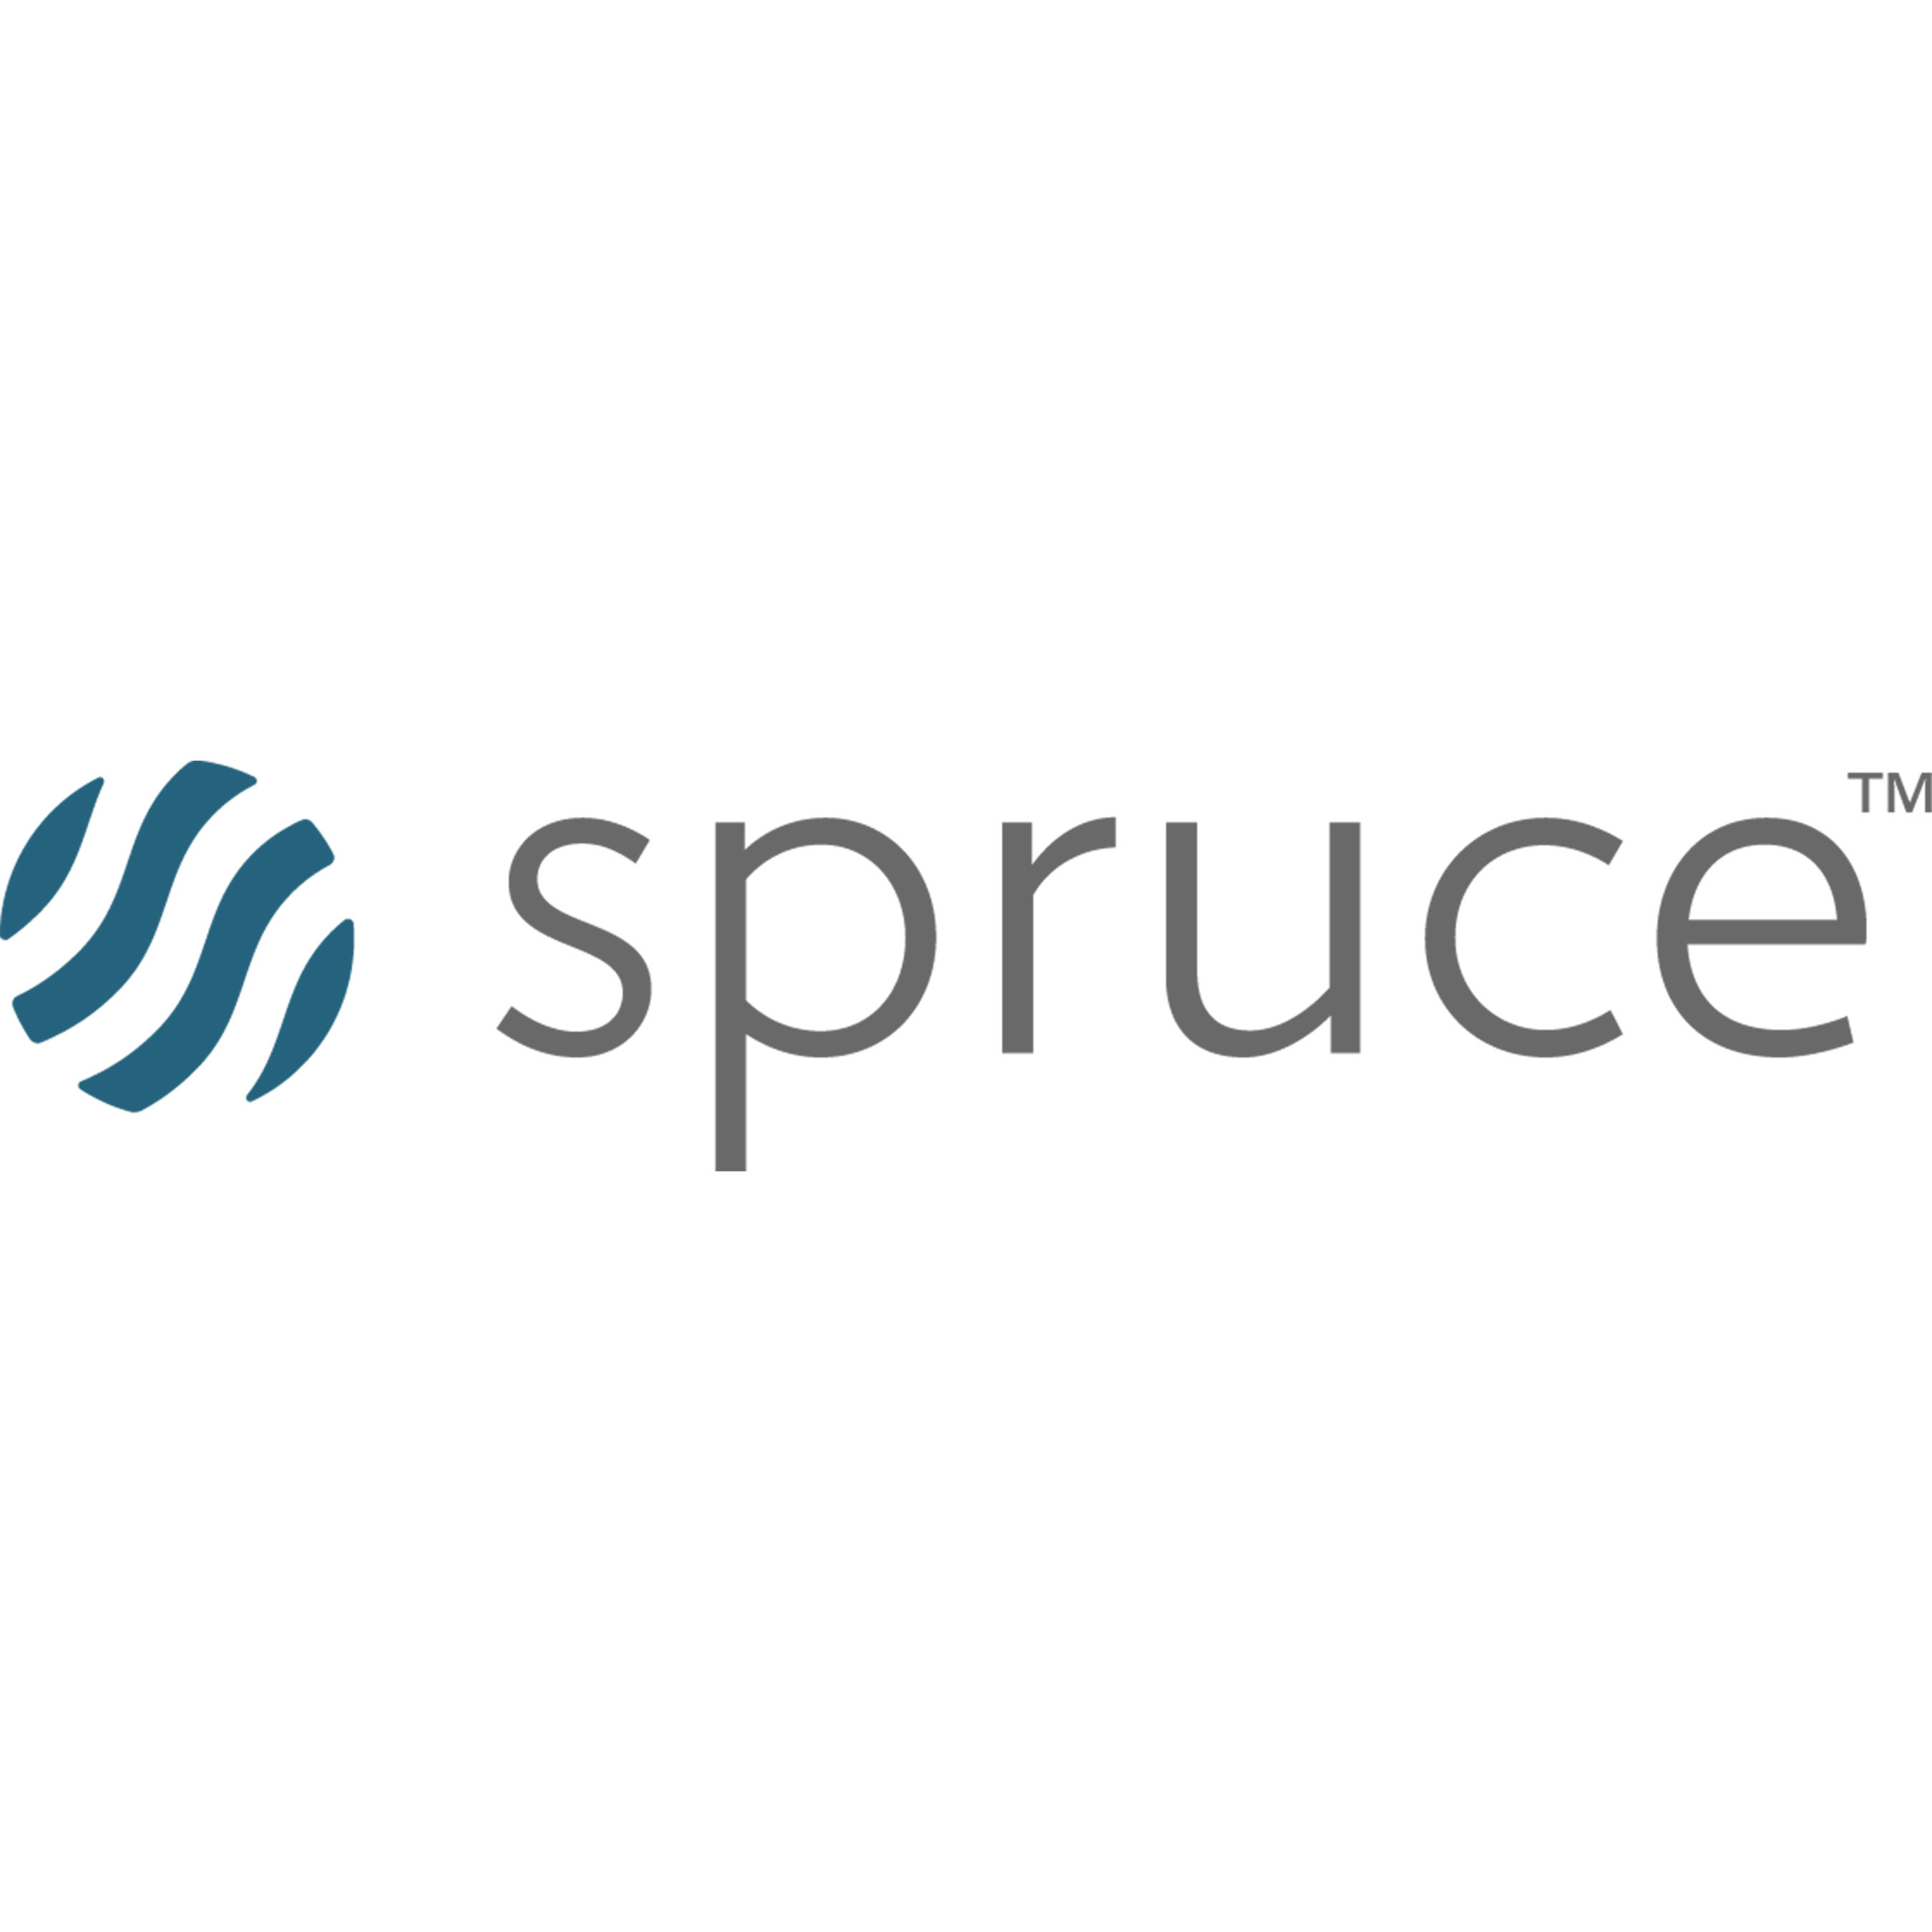 Solar Asset Owner Spruce Finance Lands $50 Million Follow-On Equity Investment from HPS Investment Partners